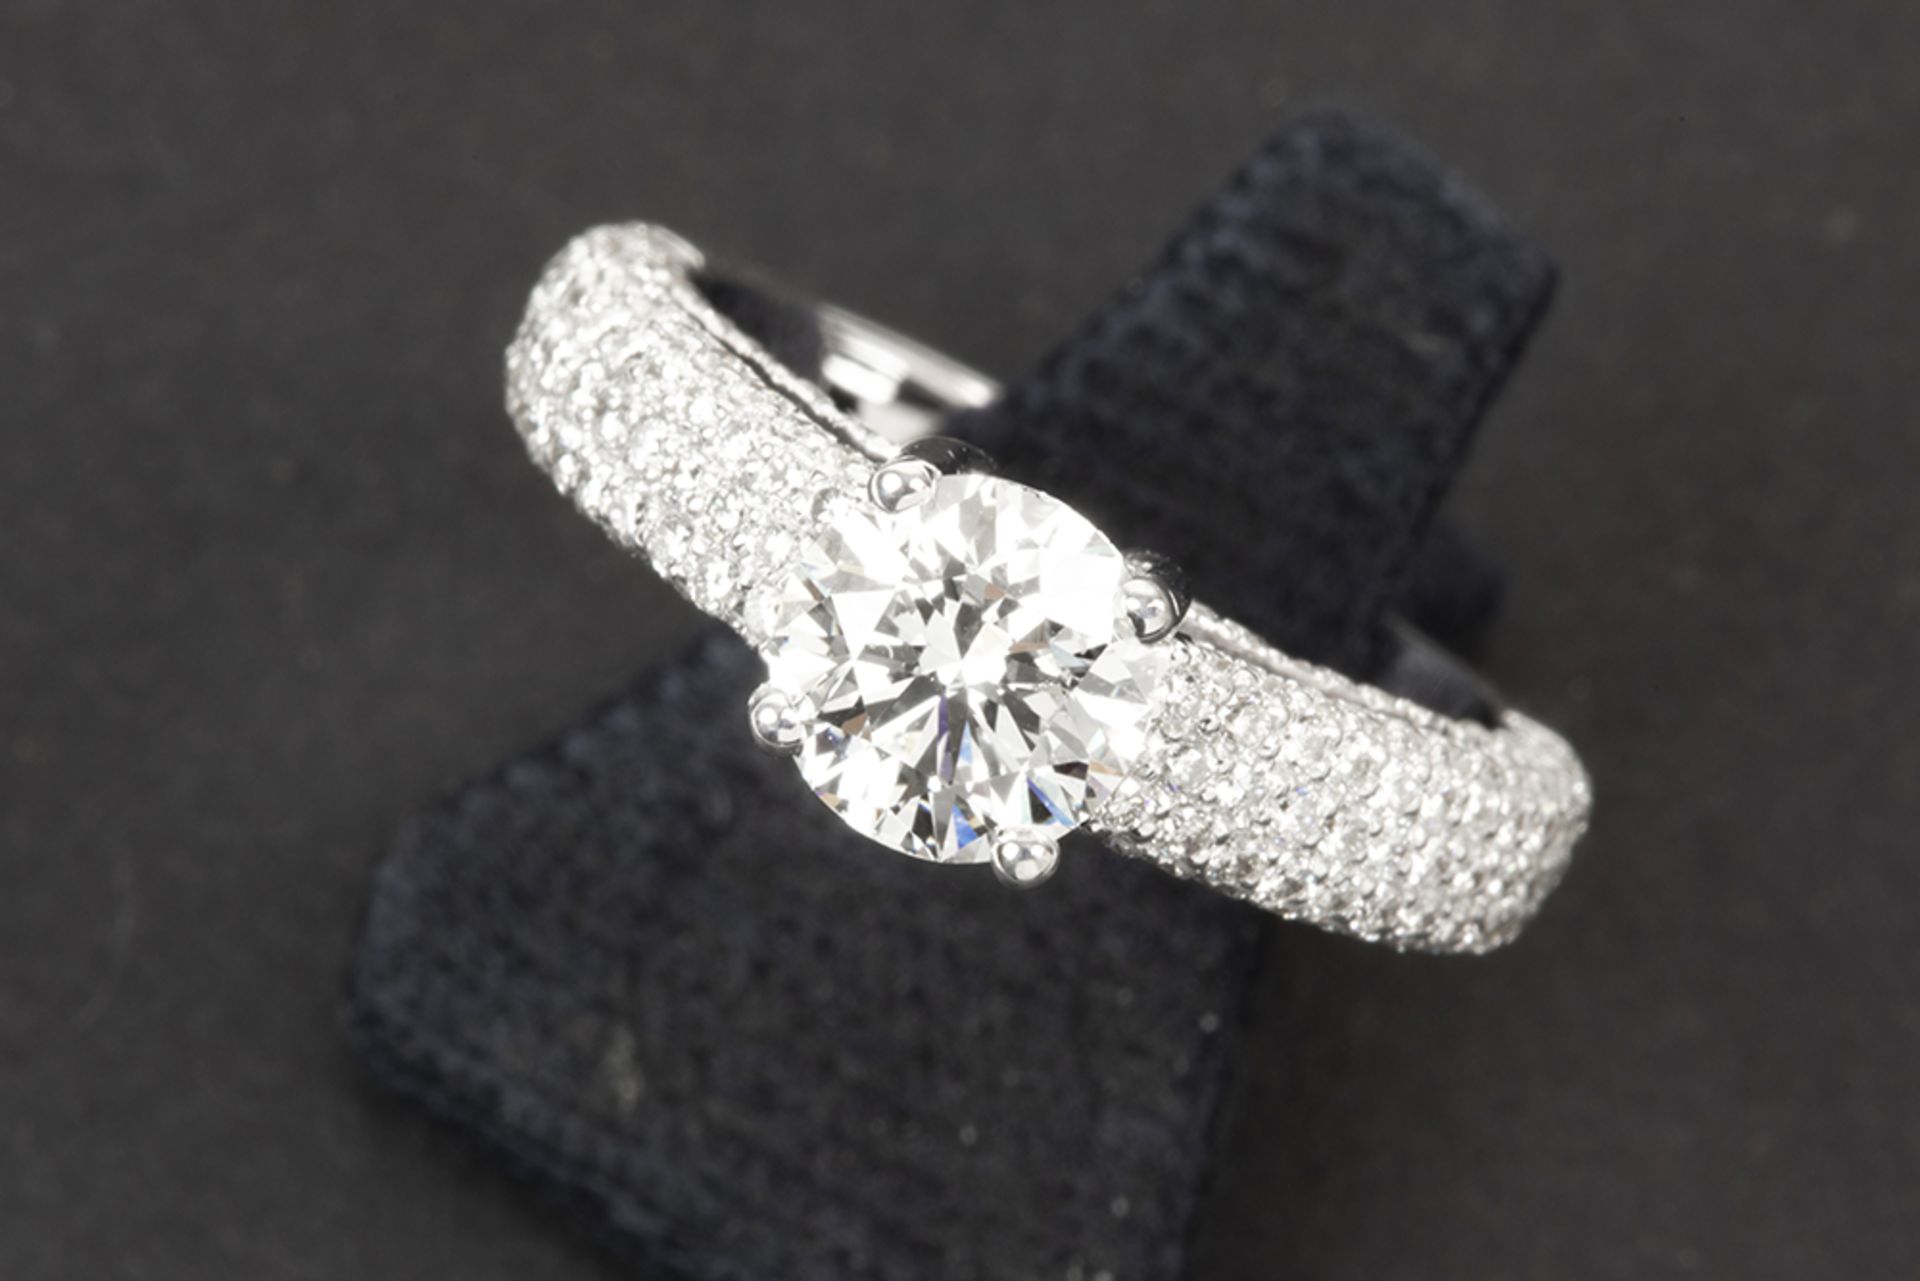 a 1 carat high quality brilliant cut diamond set in a ring in white gold (18 carat) with ca 1,20